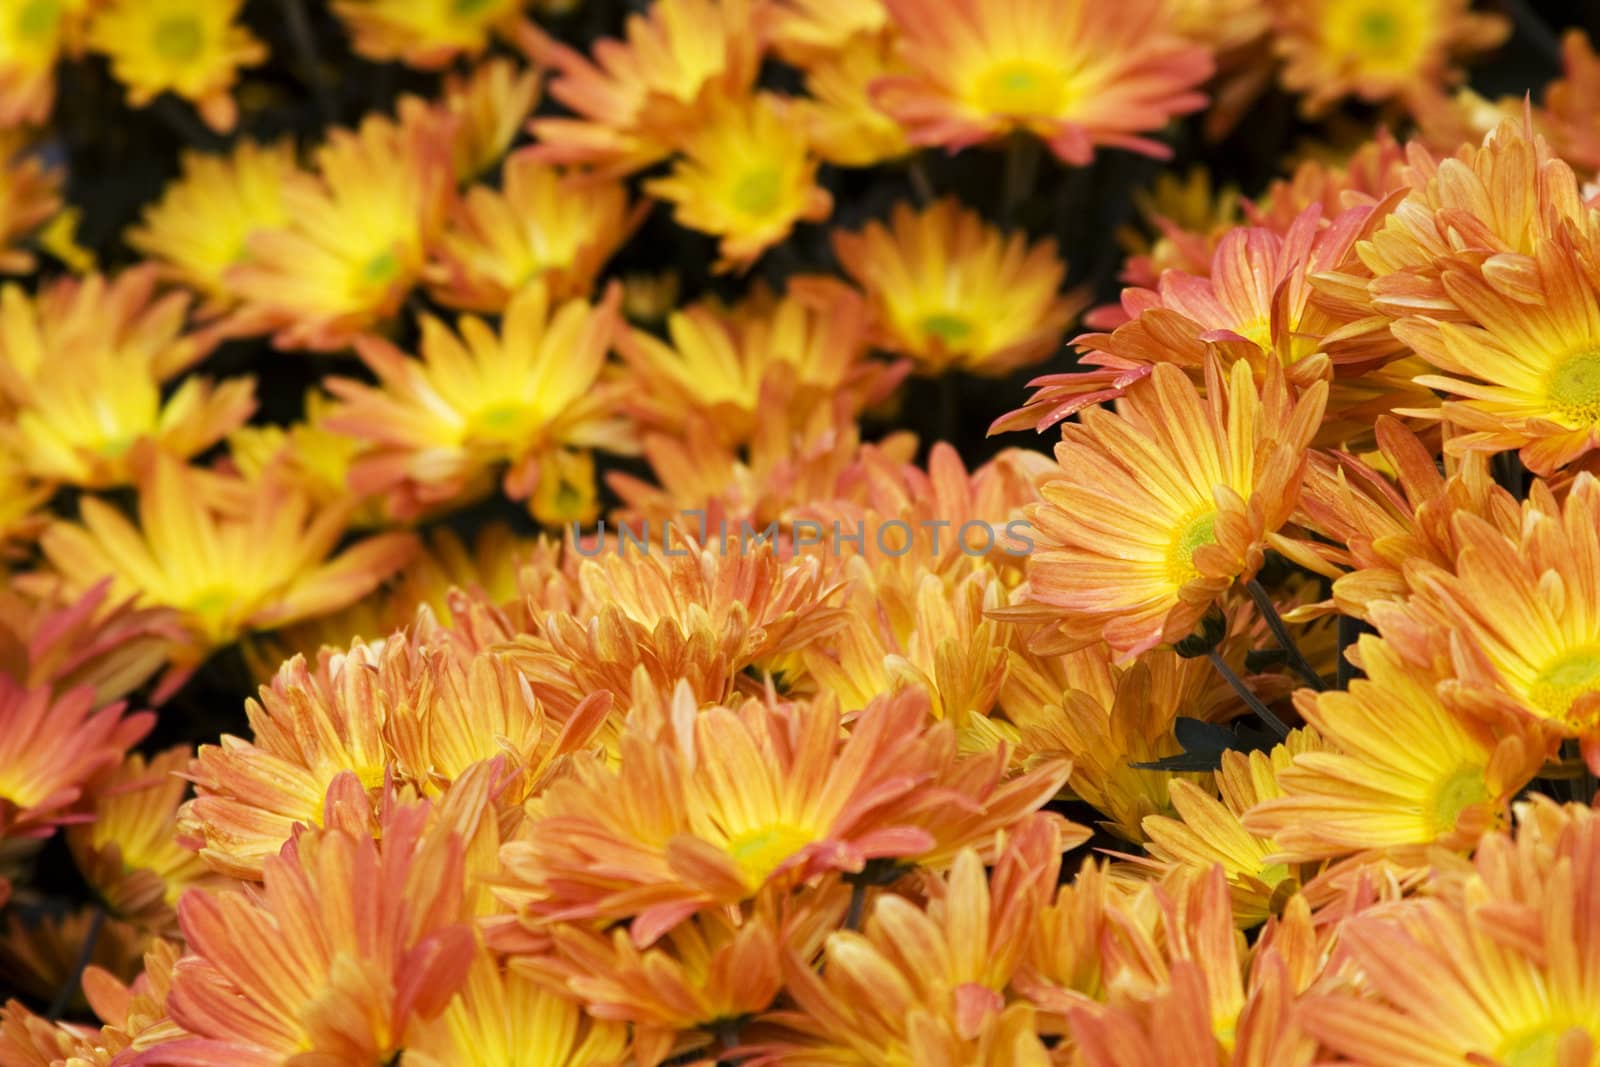 close up of orange and yellow daisies fills the frame front flowers in focus